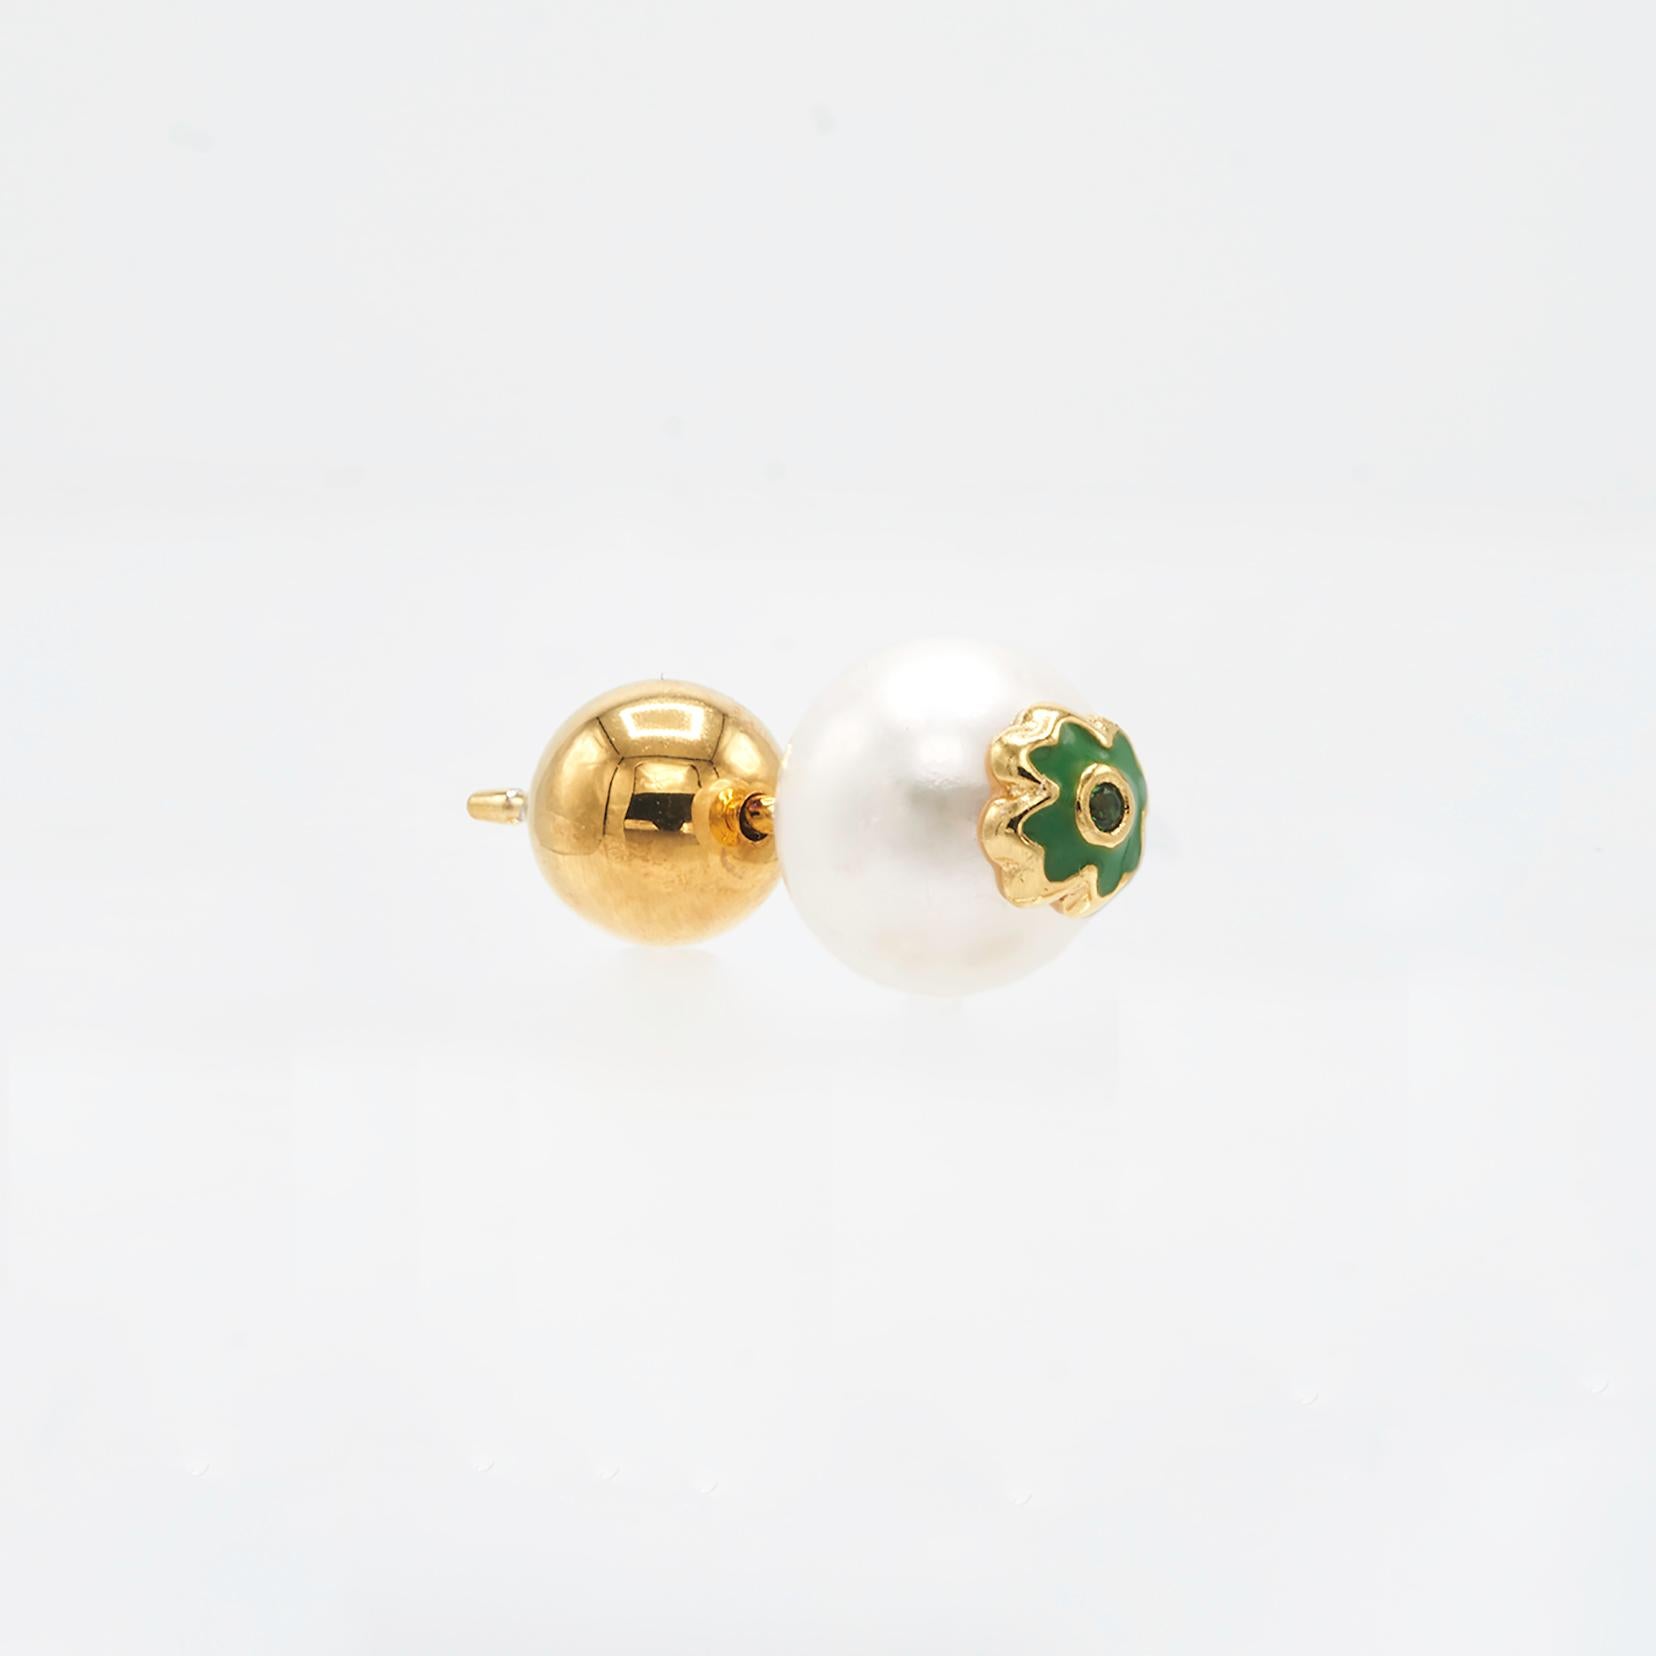 Round Pearl Ear Studs with Clover Enamel

Dimensions: 7mm Pearl
Compositions: Sterling Silver 24 K gold plates/ Fresh water pearl/ Green Enamel/ Cubic Zirconia

SOLD AS PAIRS